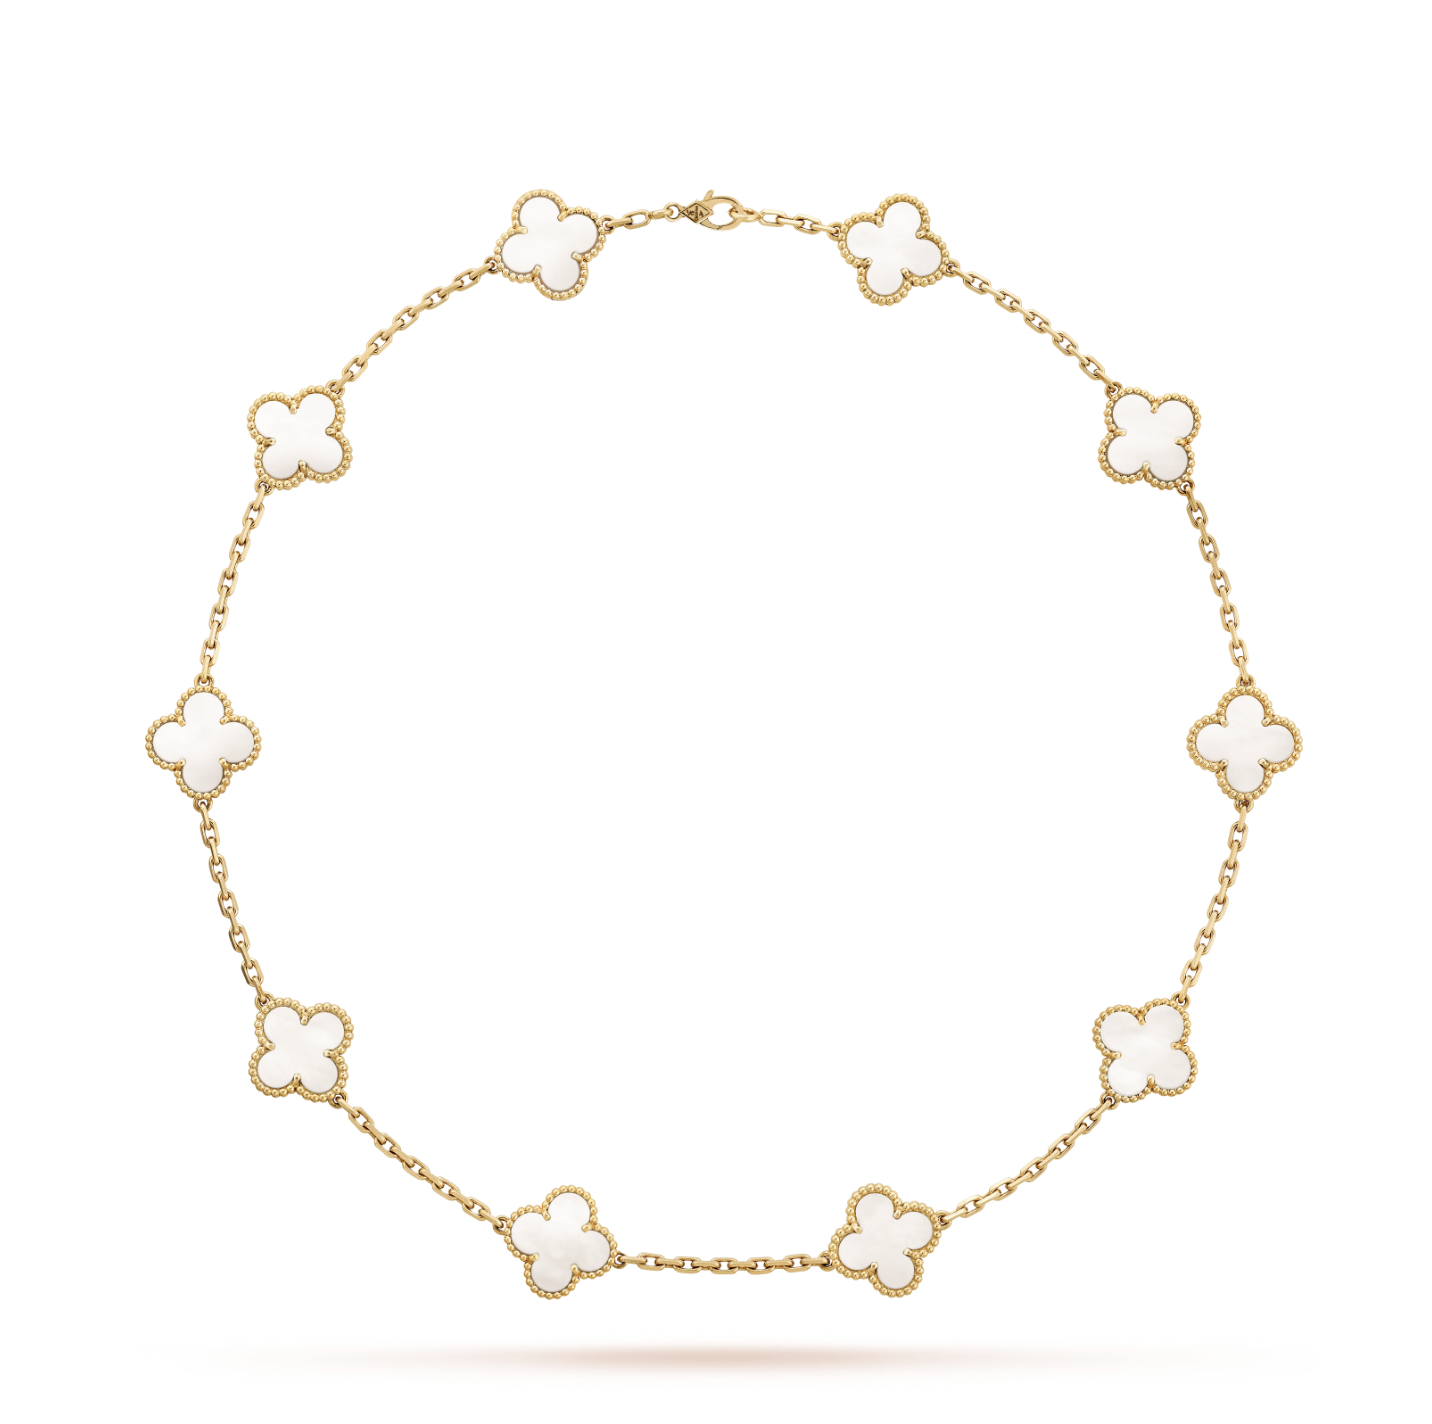 Vintage Alhambra necklace, 10 motifs 18K yellow gold, Mother-of-pearl